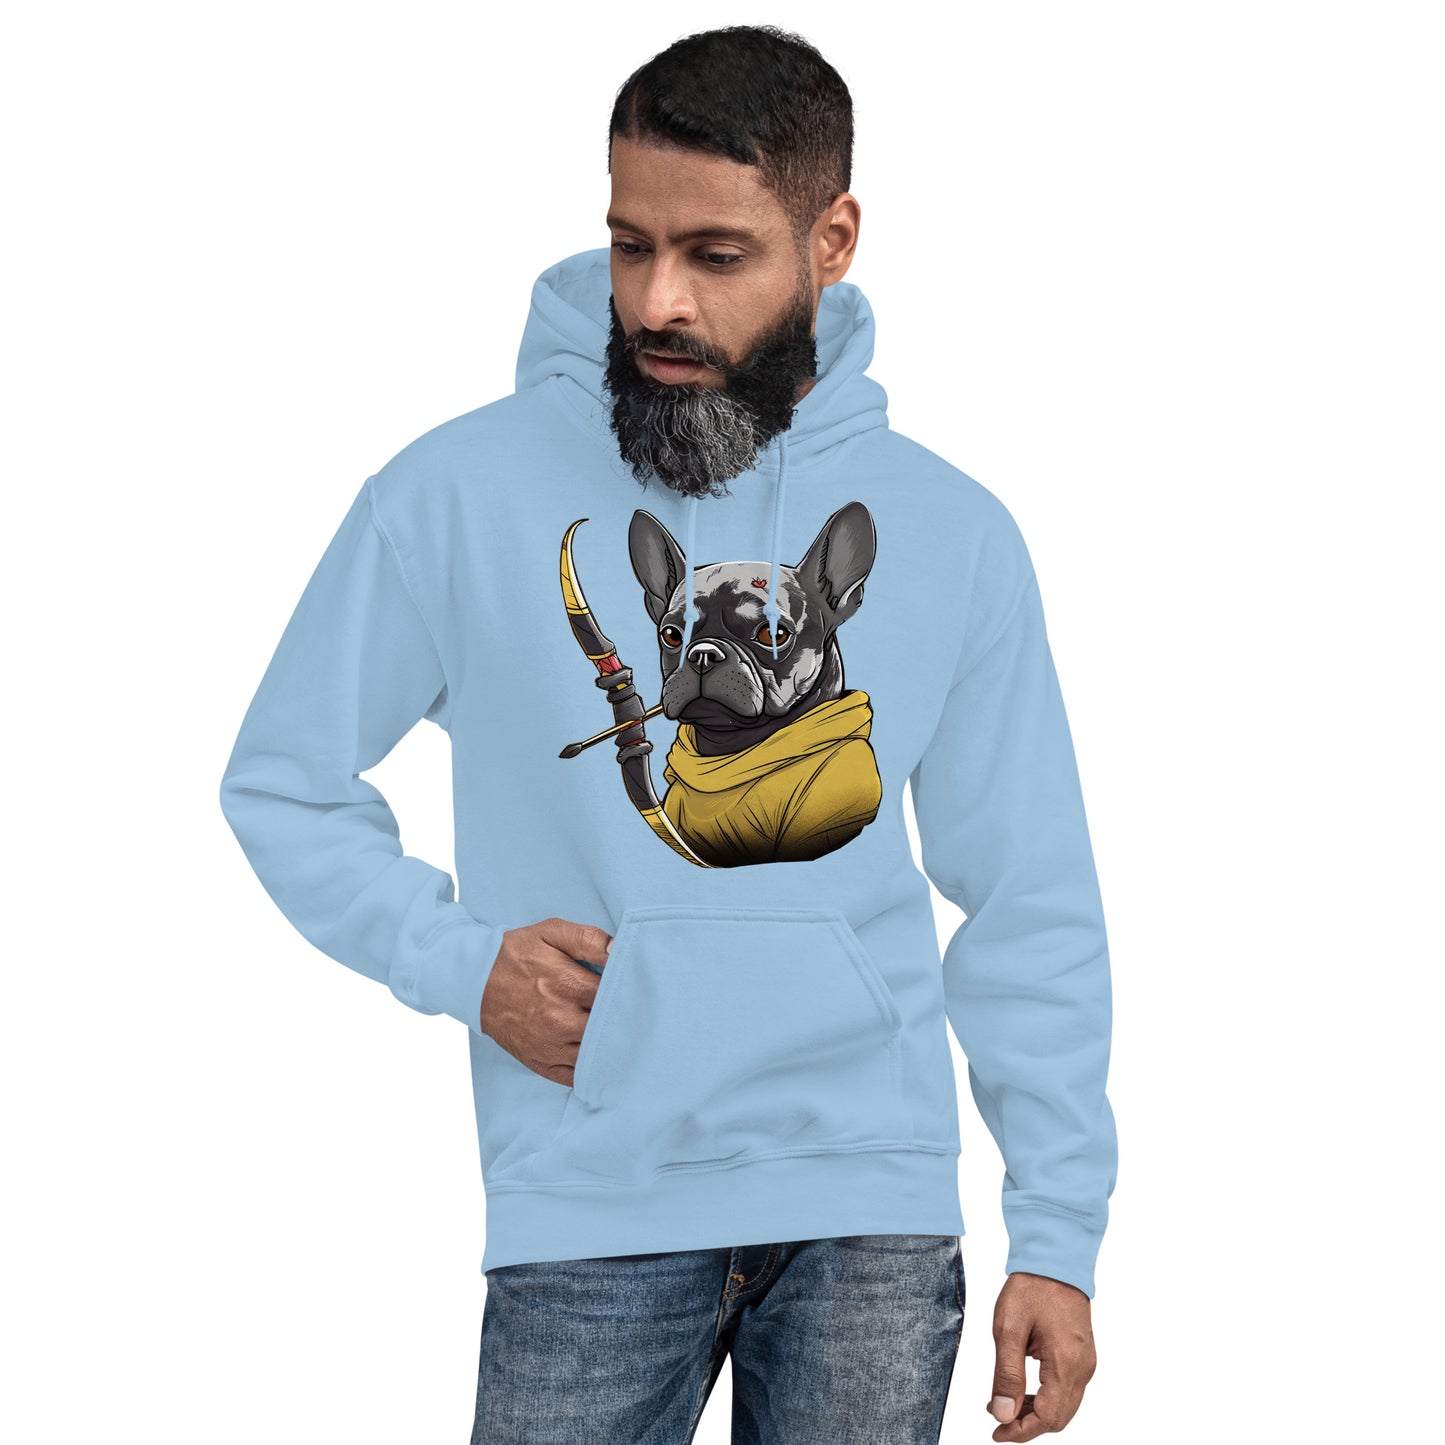 Frenchie Love Unisex Hoodie - Soft & Chic Apparel for Dog Enthusiasts